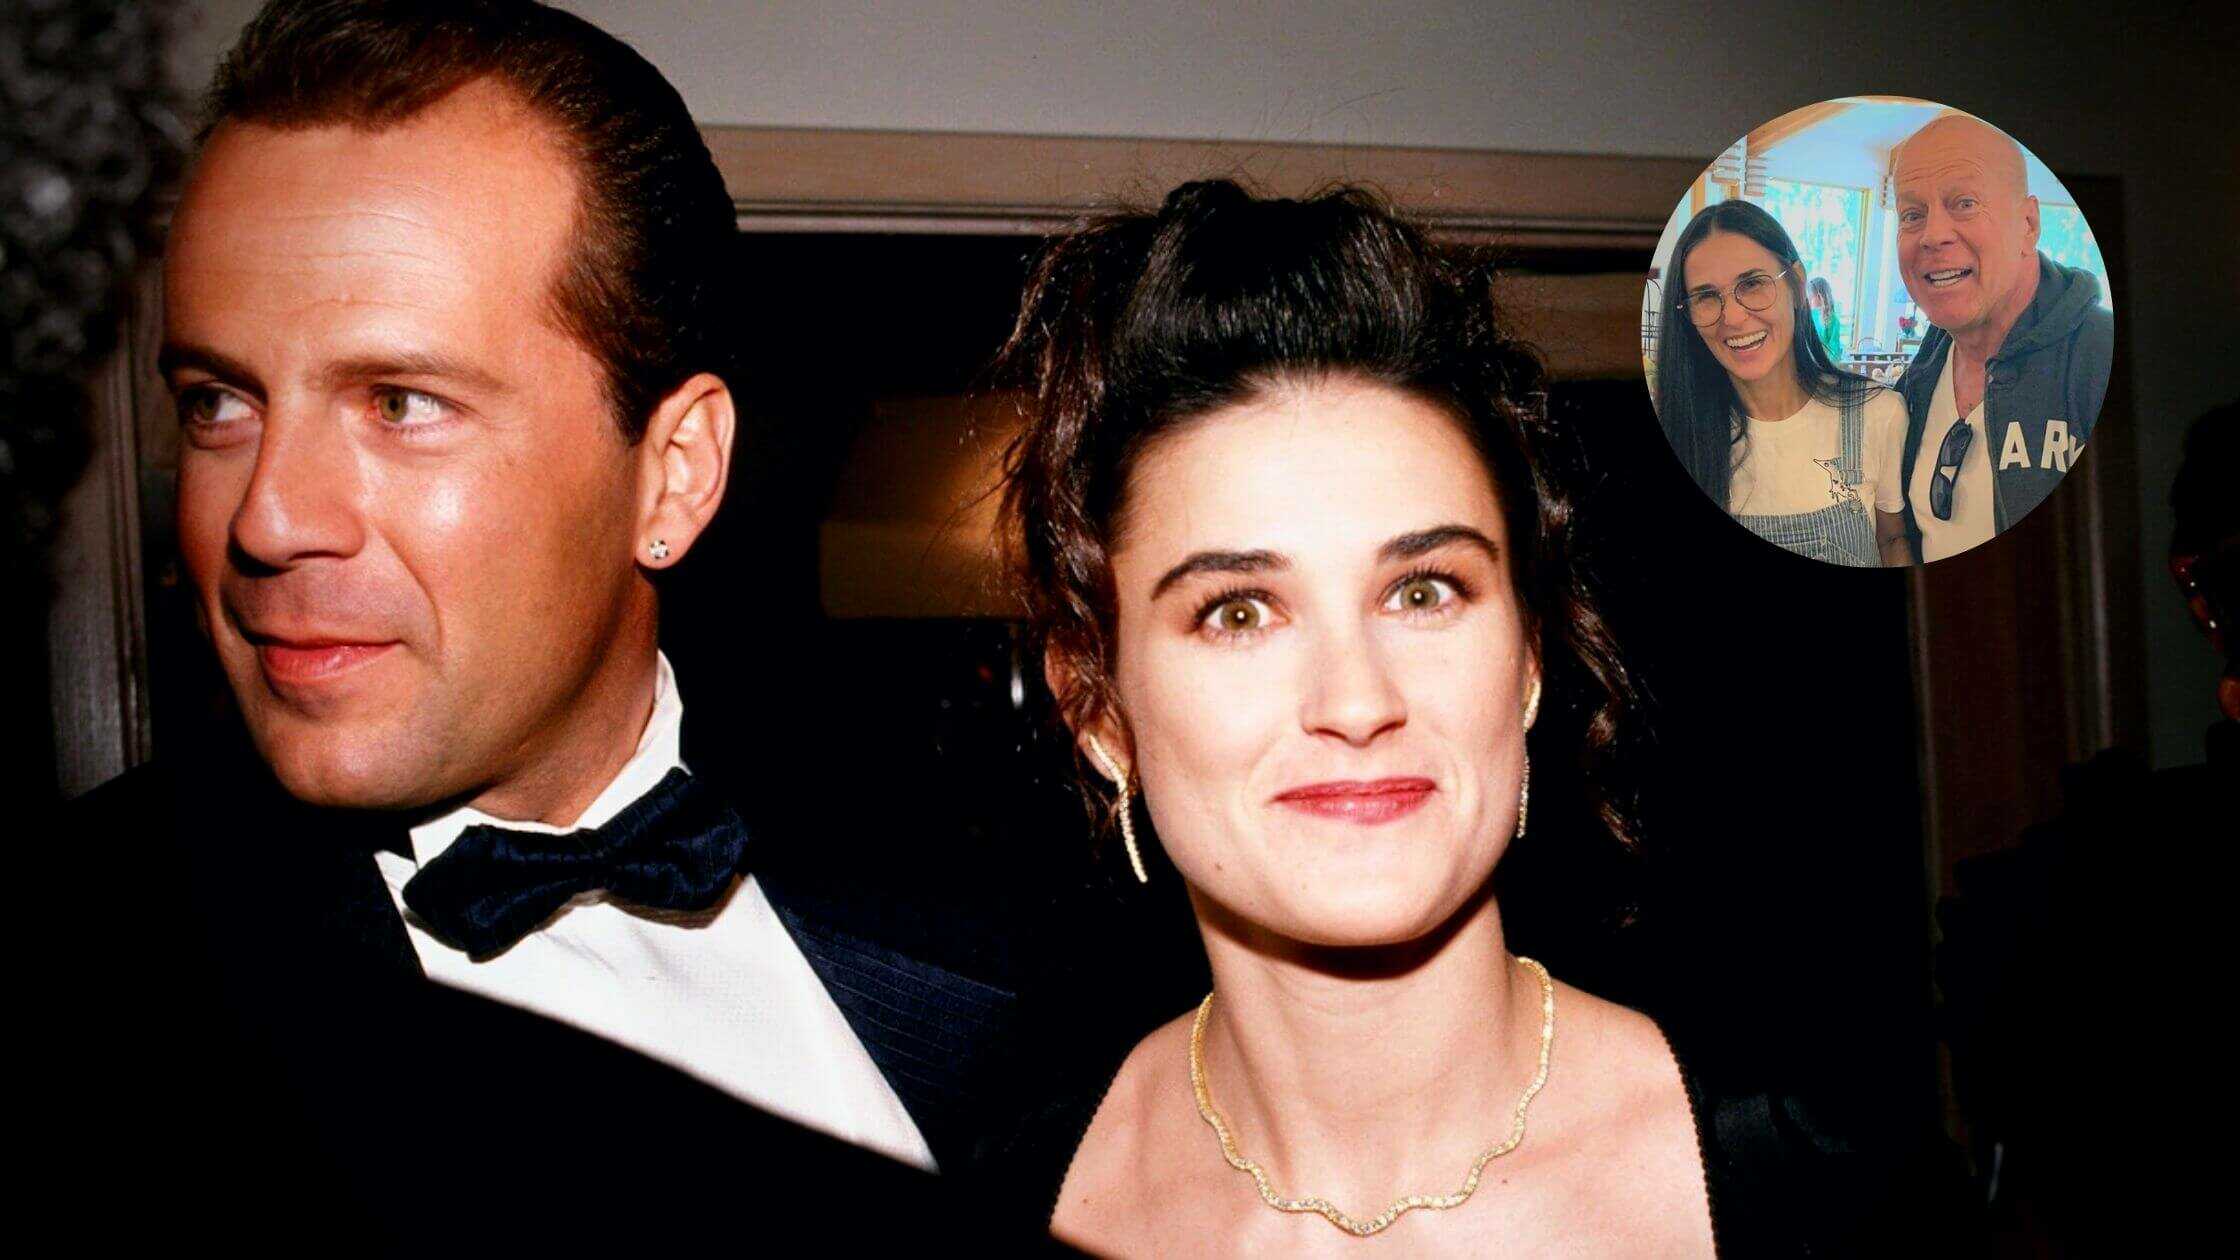 Together With Tallulah, Demi Moore And Bruce Willis Reunite For A Rare Photo